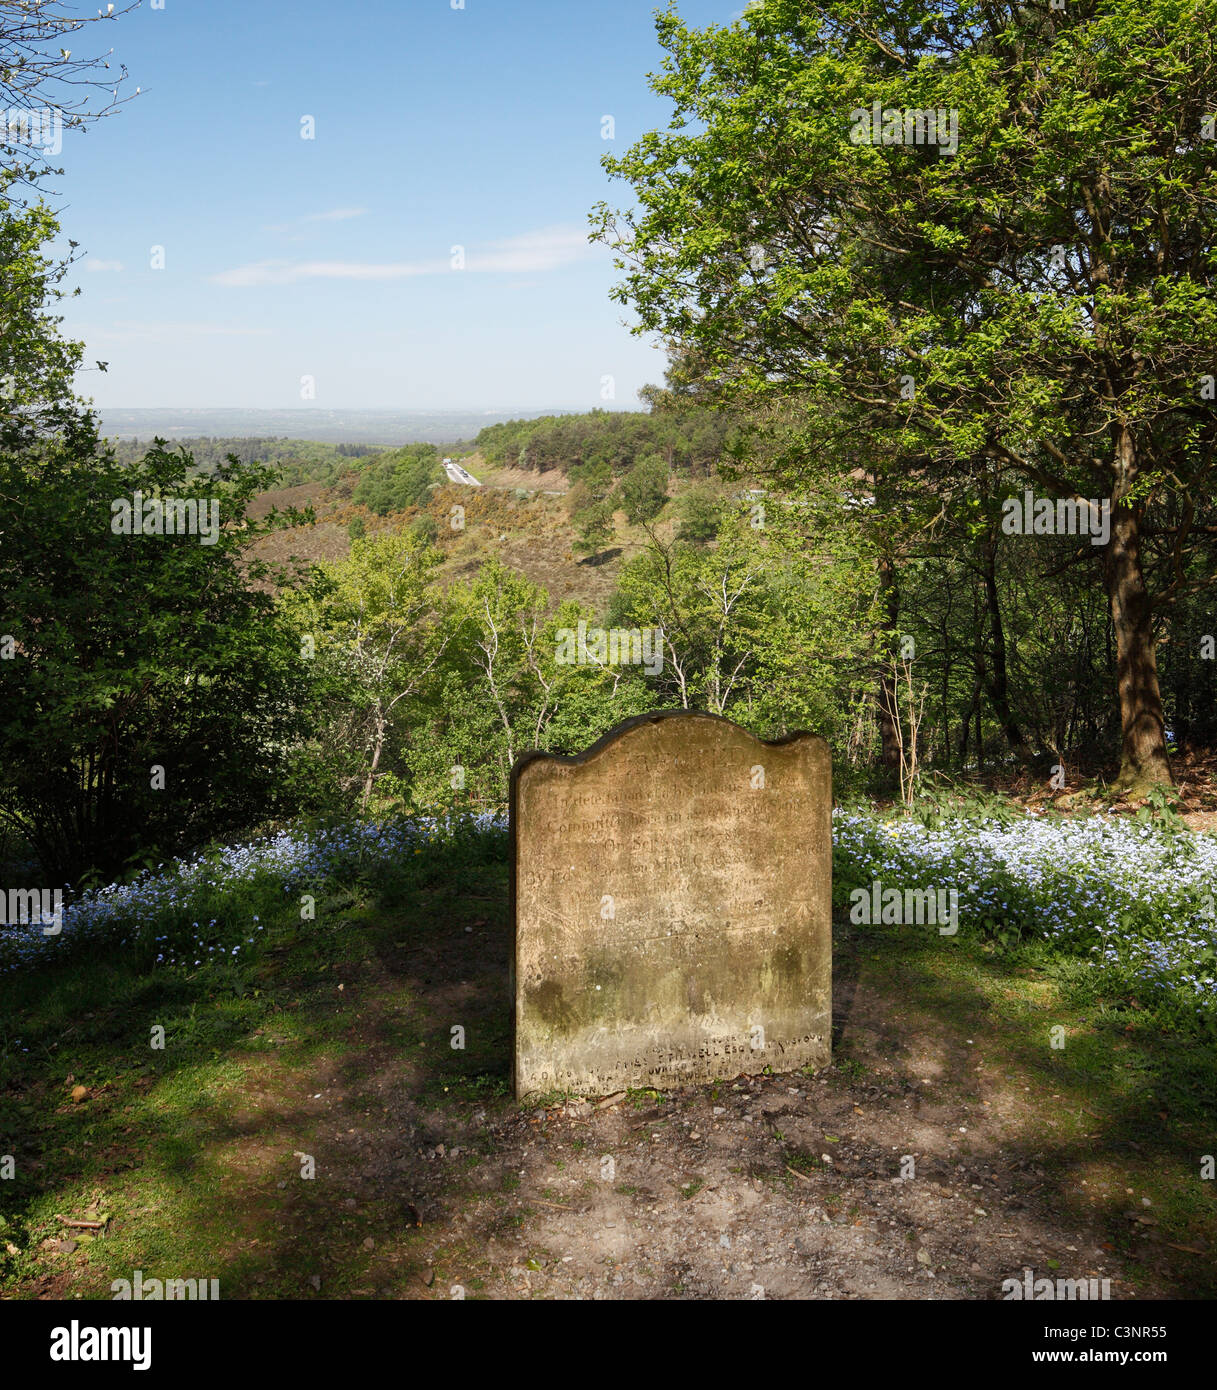 The Sailors Stone near Gibbet Hill marking the place of a murder in 1786. Hindhead common, Surrey, England, UK. Stock Photo